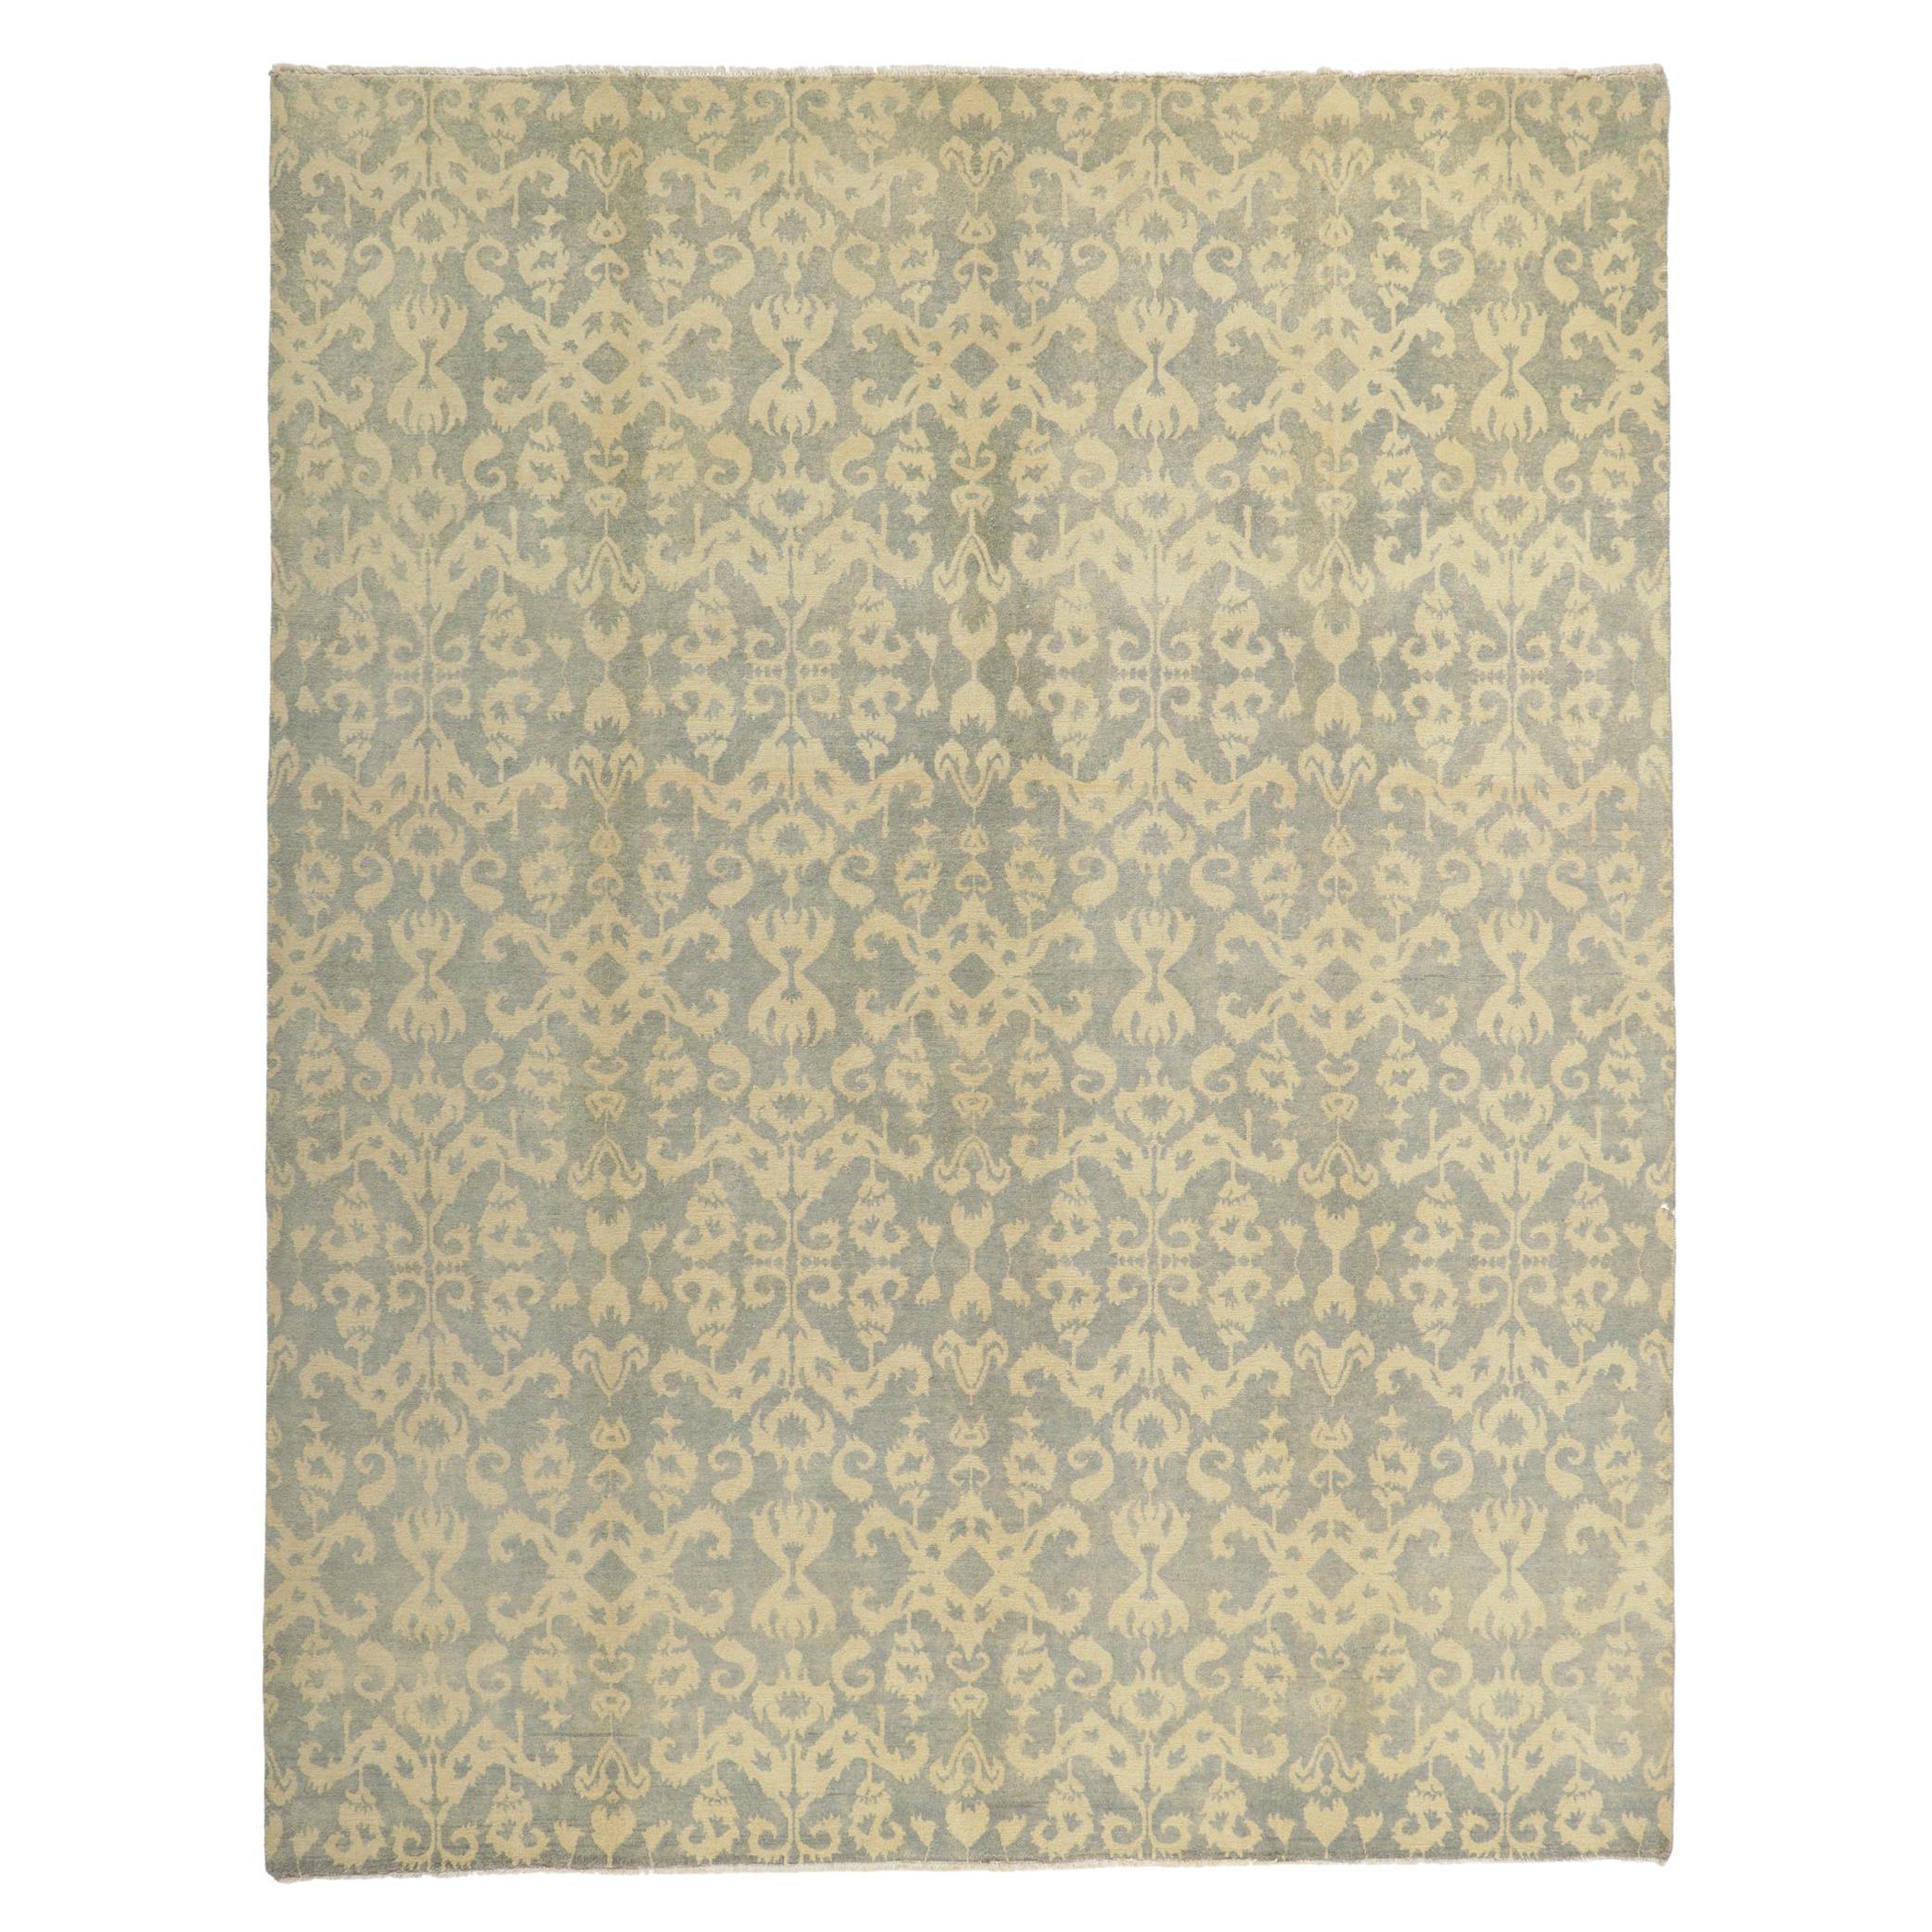 New Transitional Ikat Area Rug with Soft Earth-Tone Colors For Sale